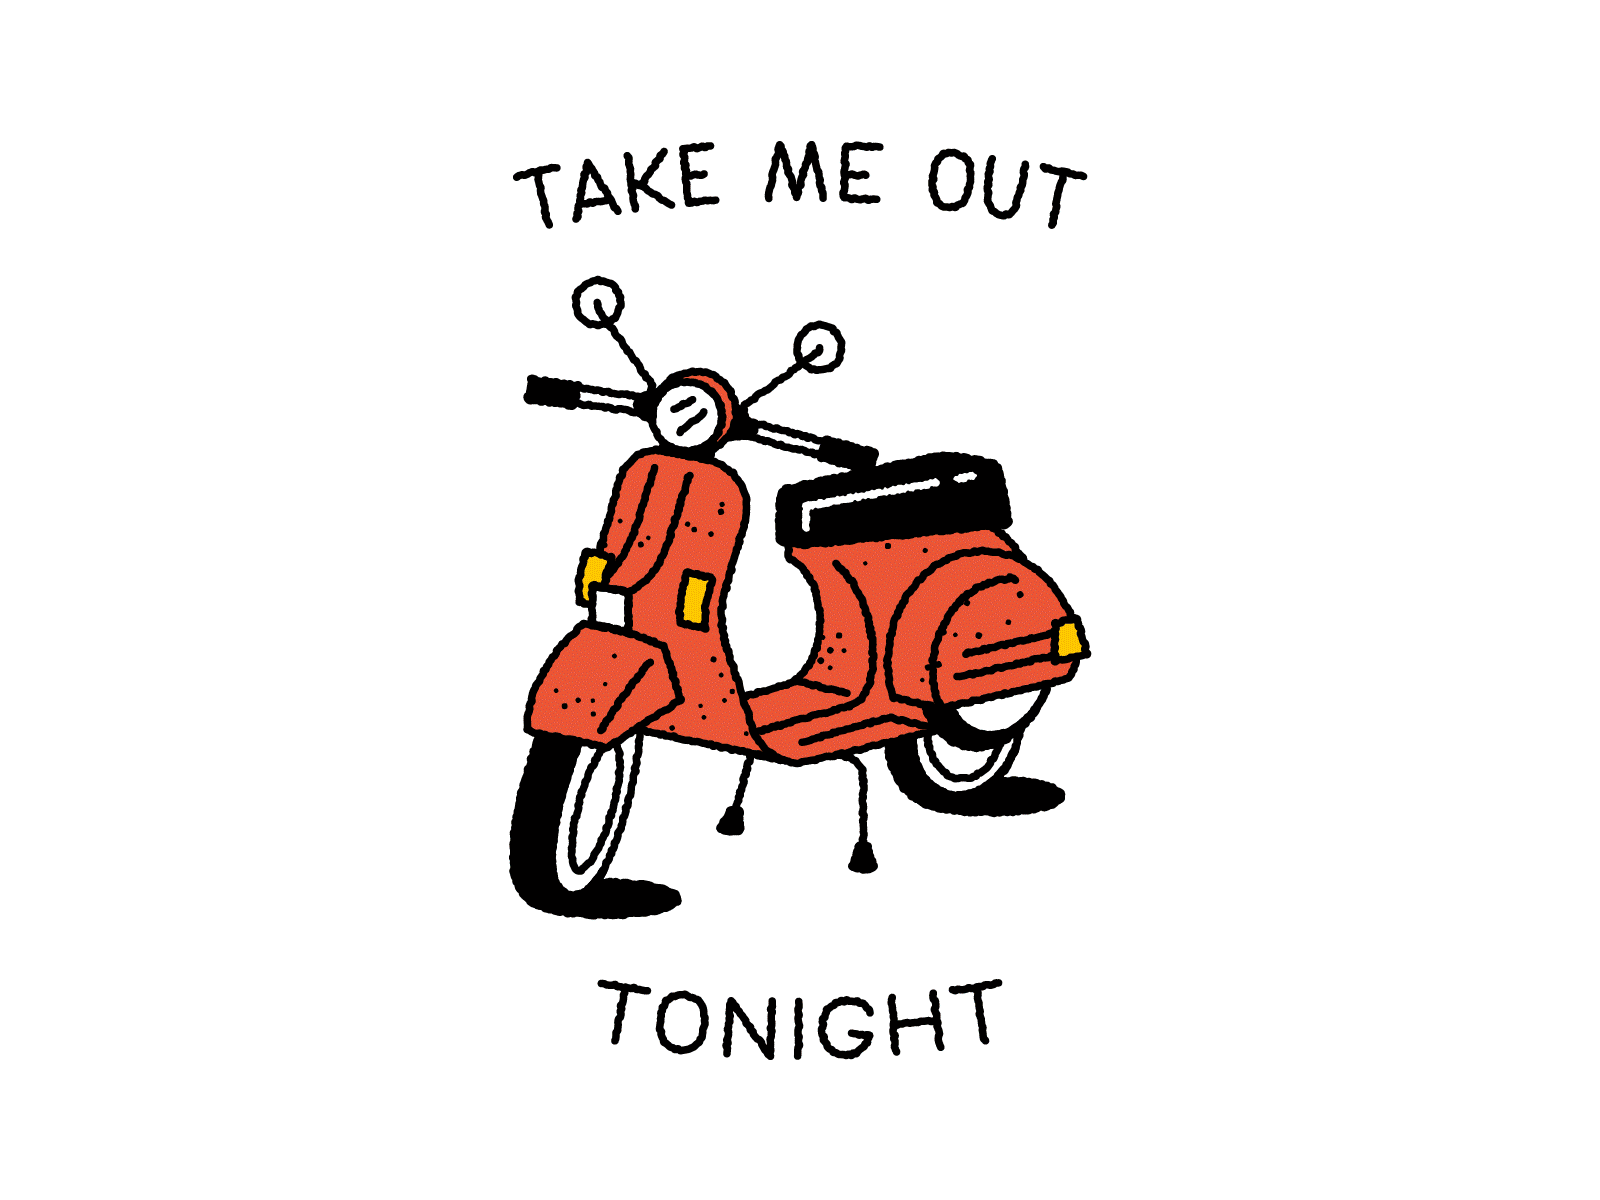 Take Me Out Tonight automotive bicycle bike doodle everpress font lettering moped motorcycle music piaggio song tattoo tee thesmiths tshirt typeface typography vehicle vespa